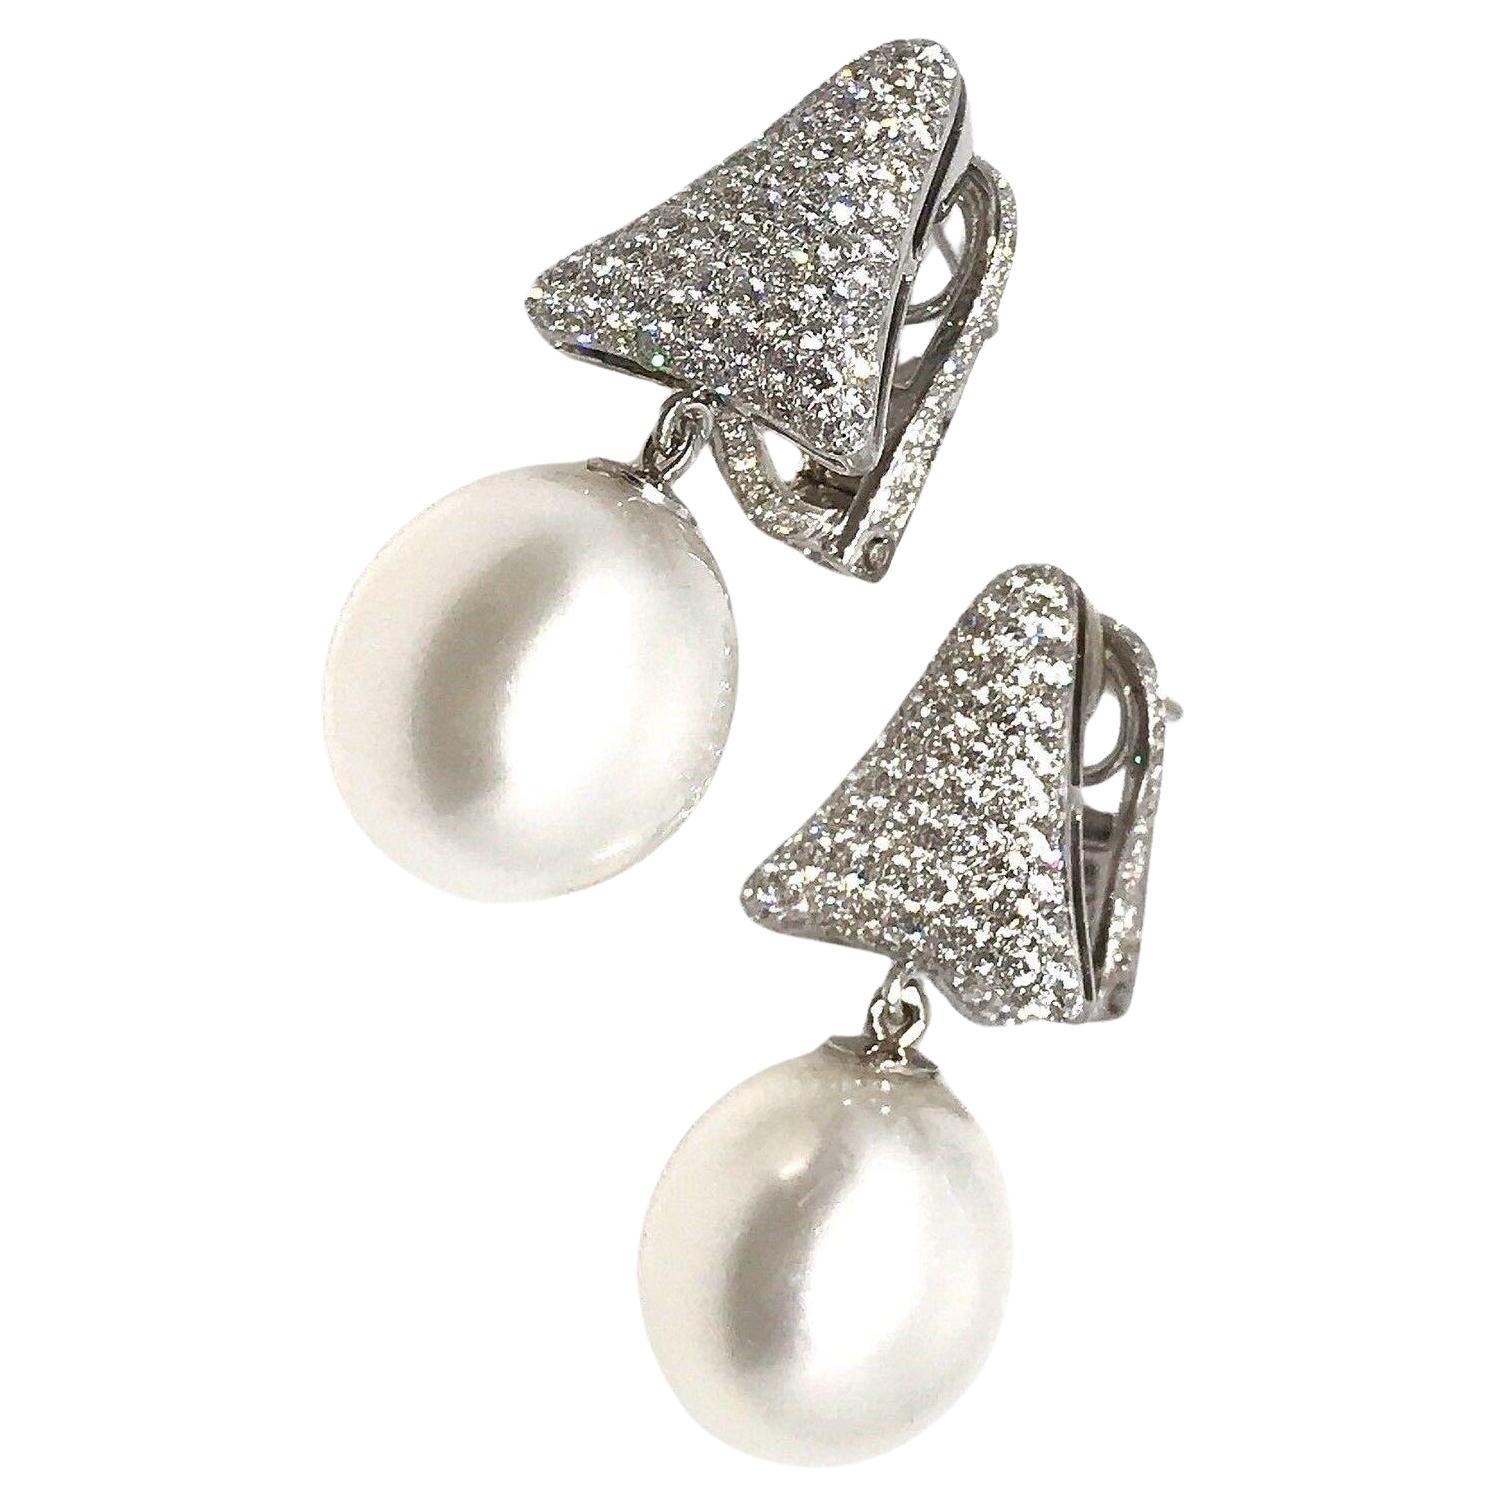 South Sea Pearl and Pave Diamond Drop Earrings in 18k White Gold